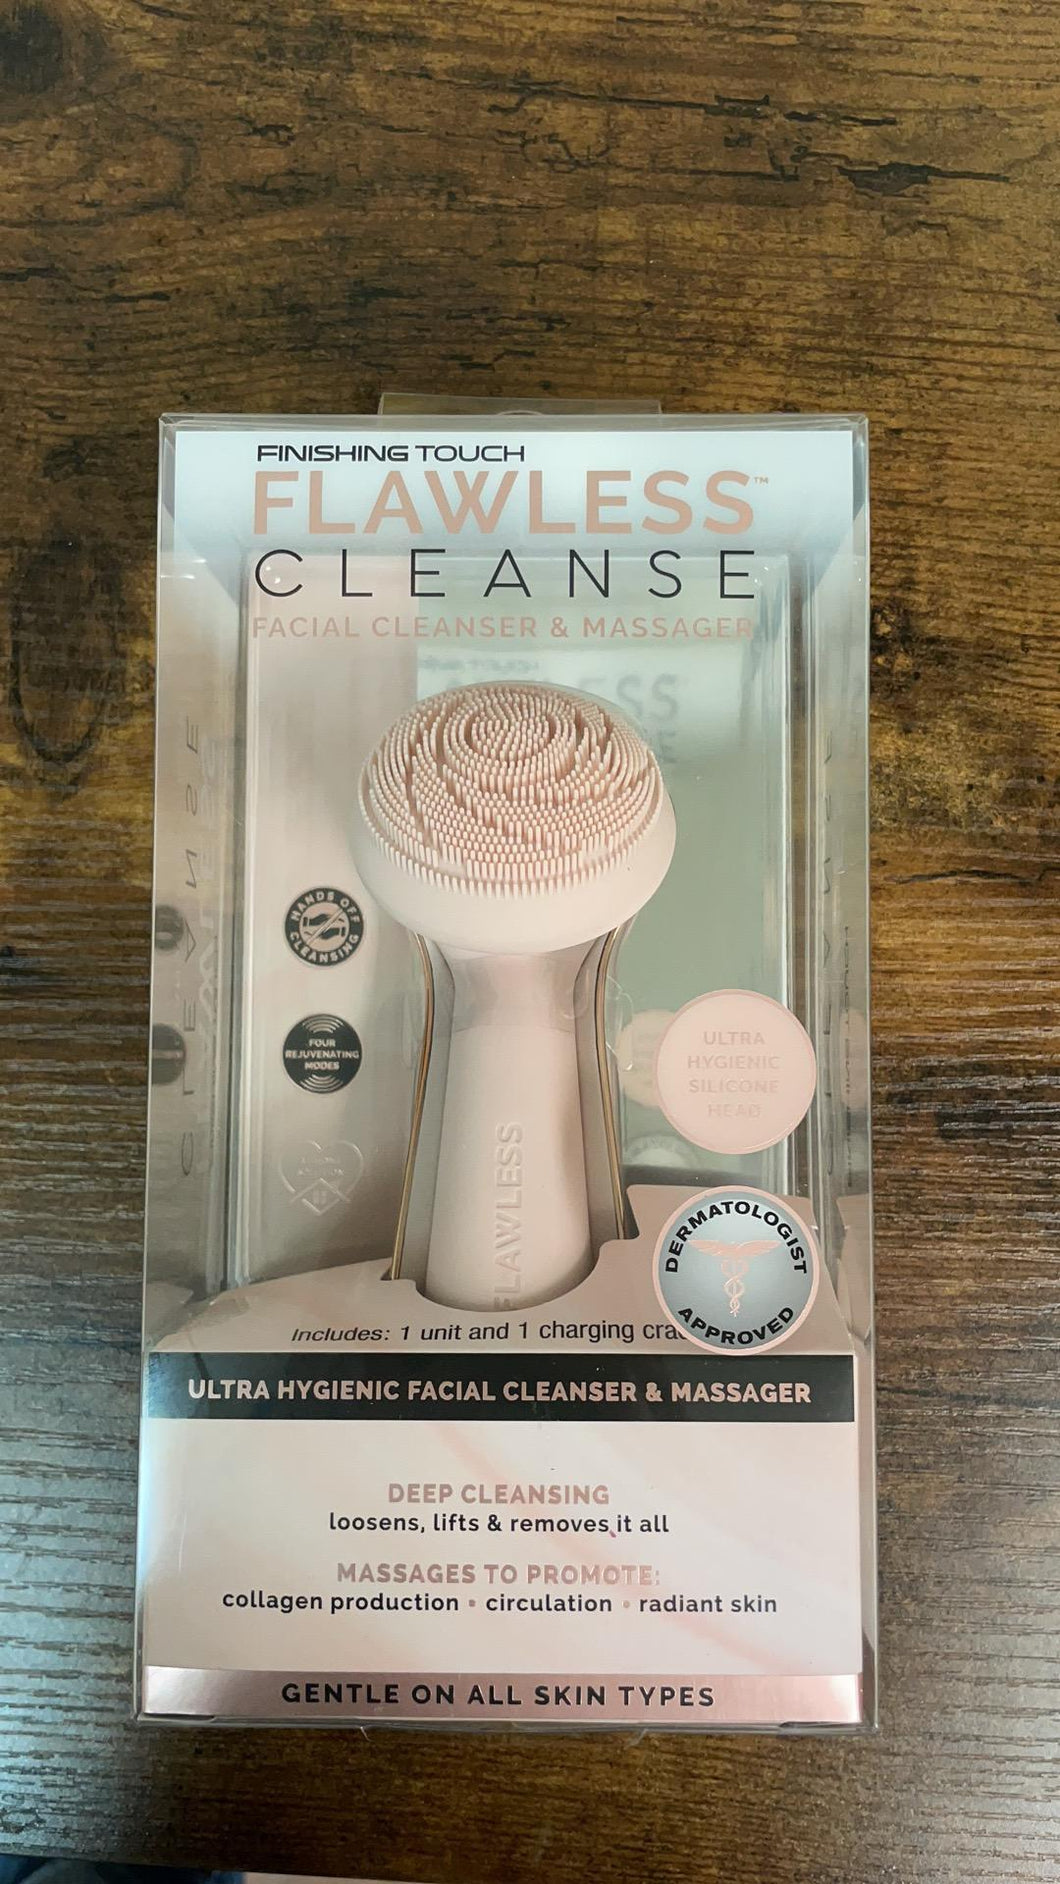 FLAWLESS Cleanser Facial Cleansing Brush - Pink